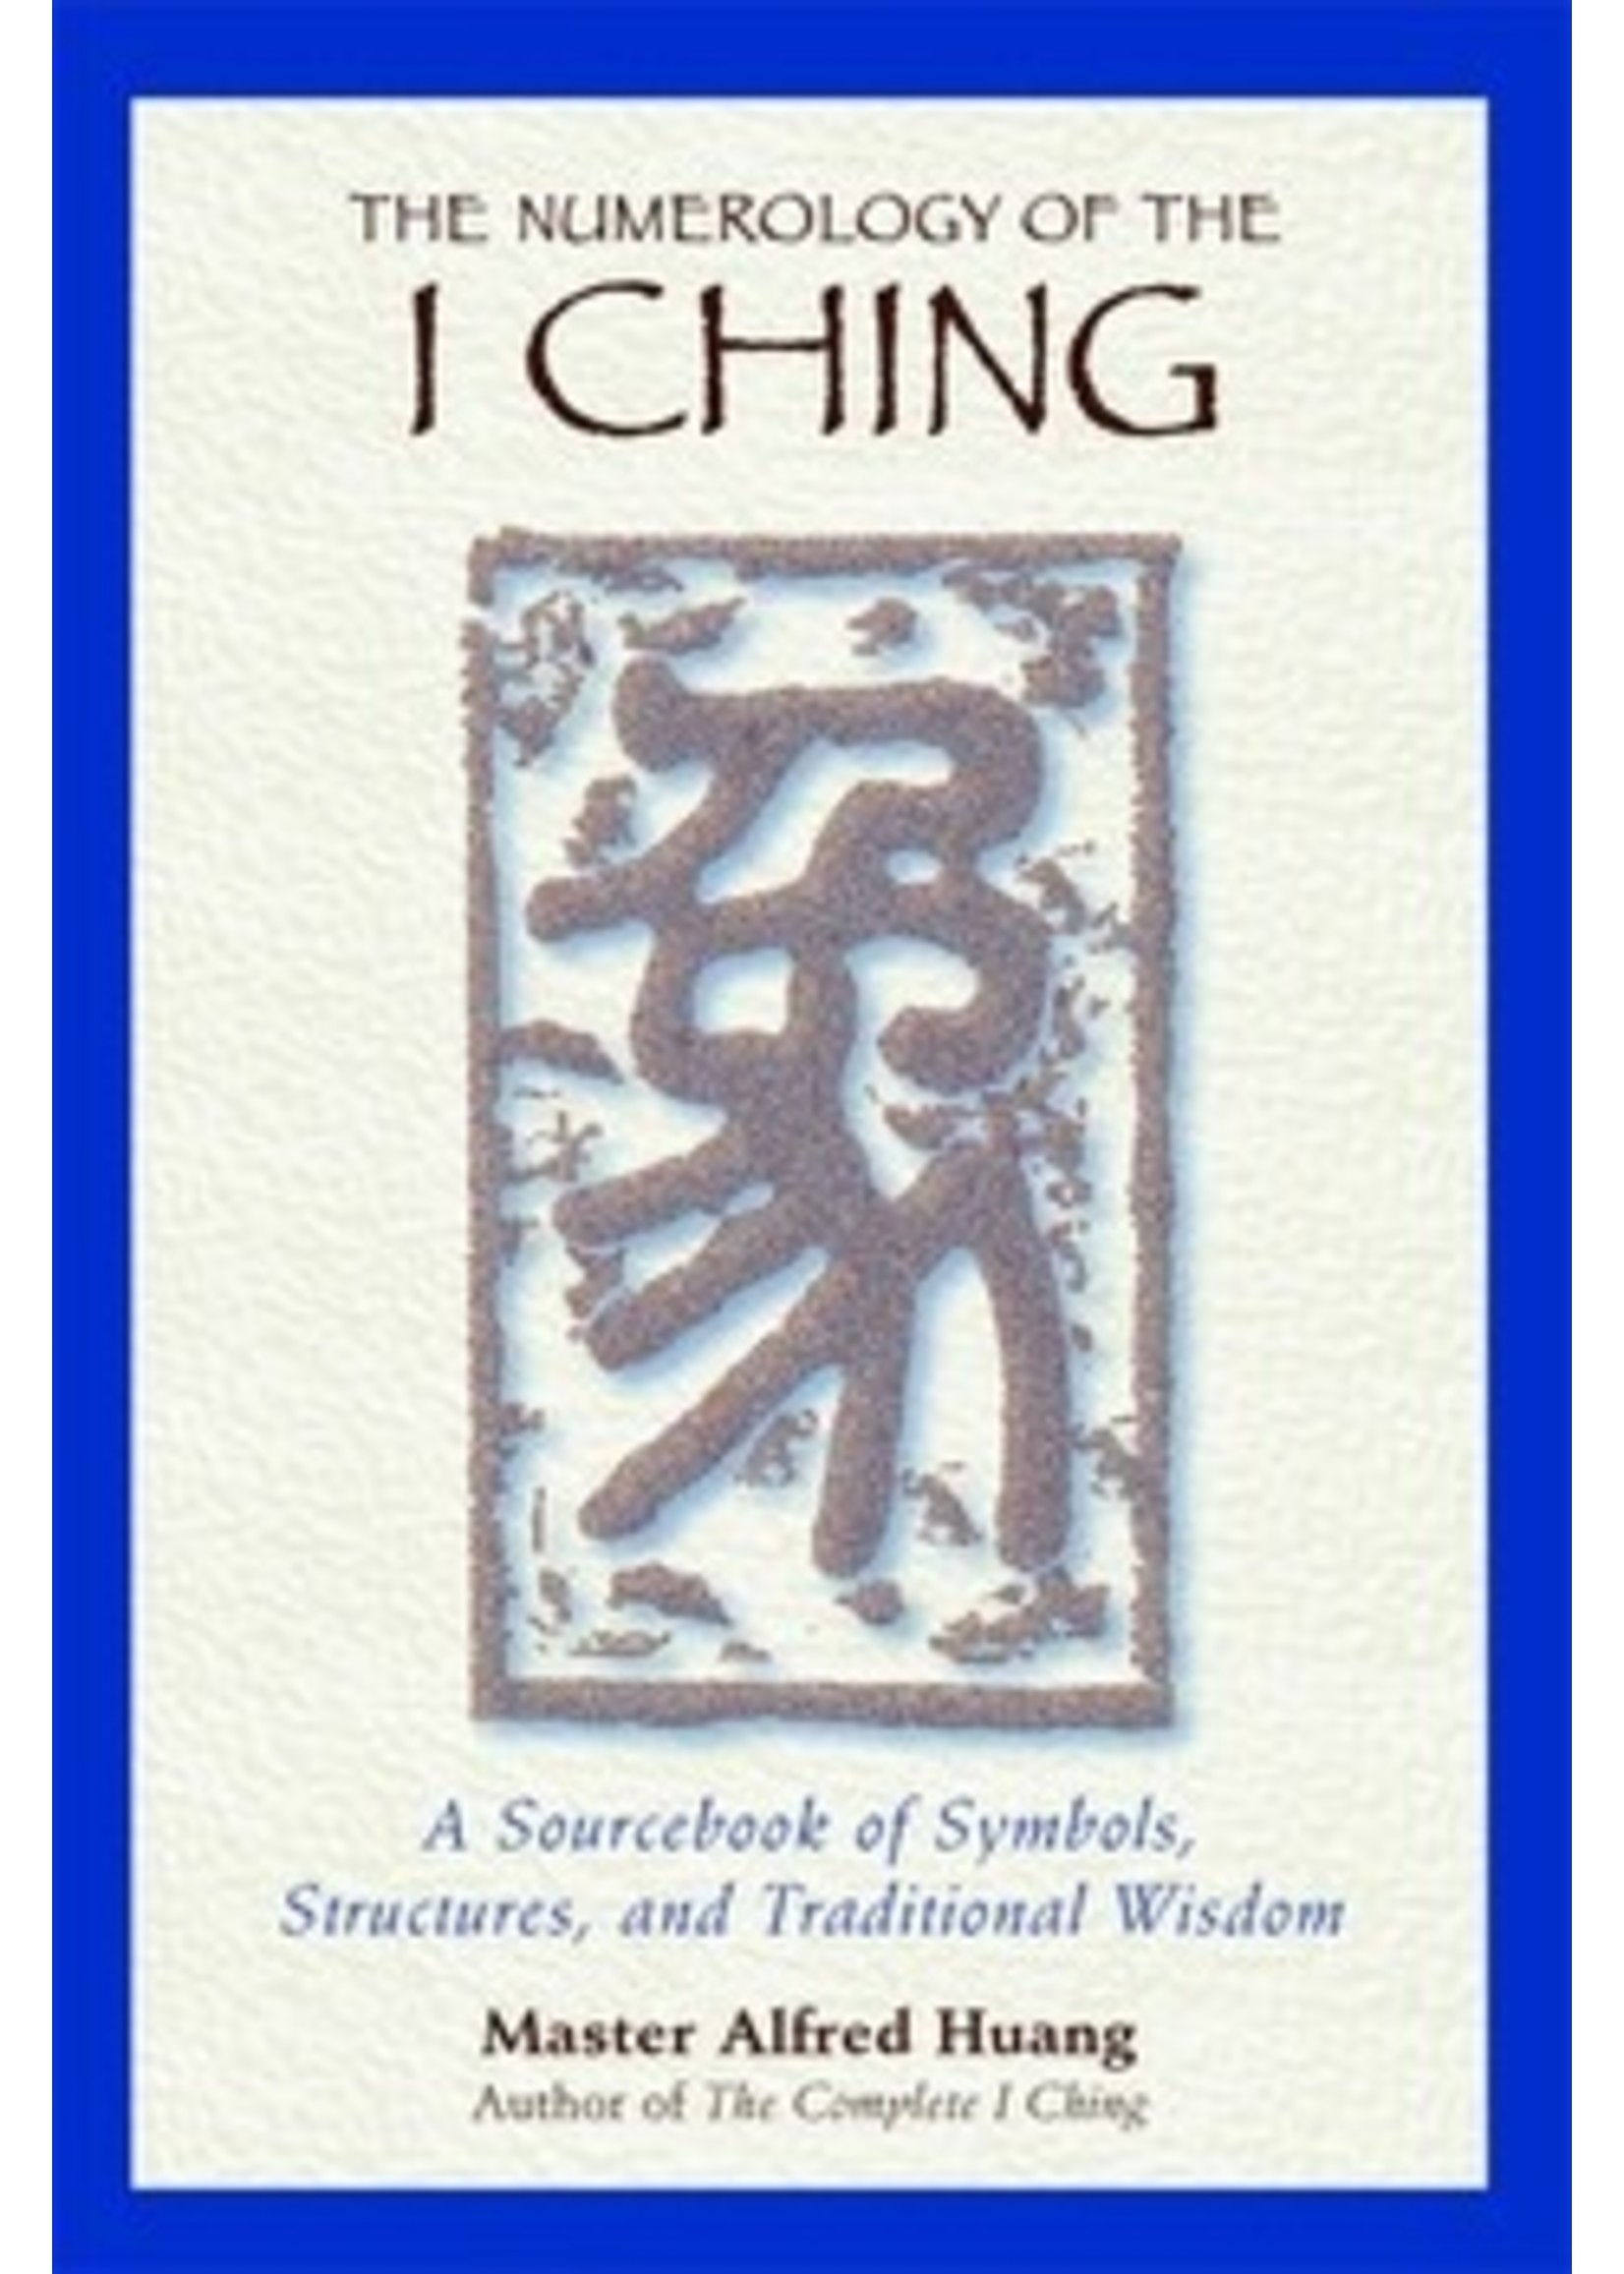 The Numerology of the I Ching A Sourcebook of Symbols, Structures, and Traditional Wisdom